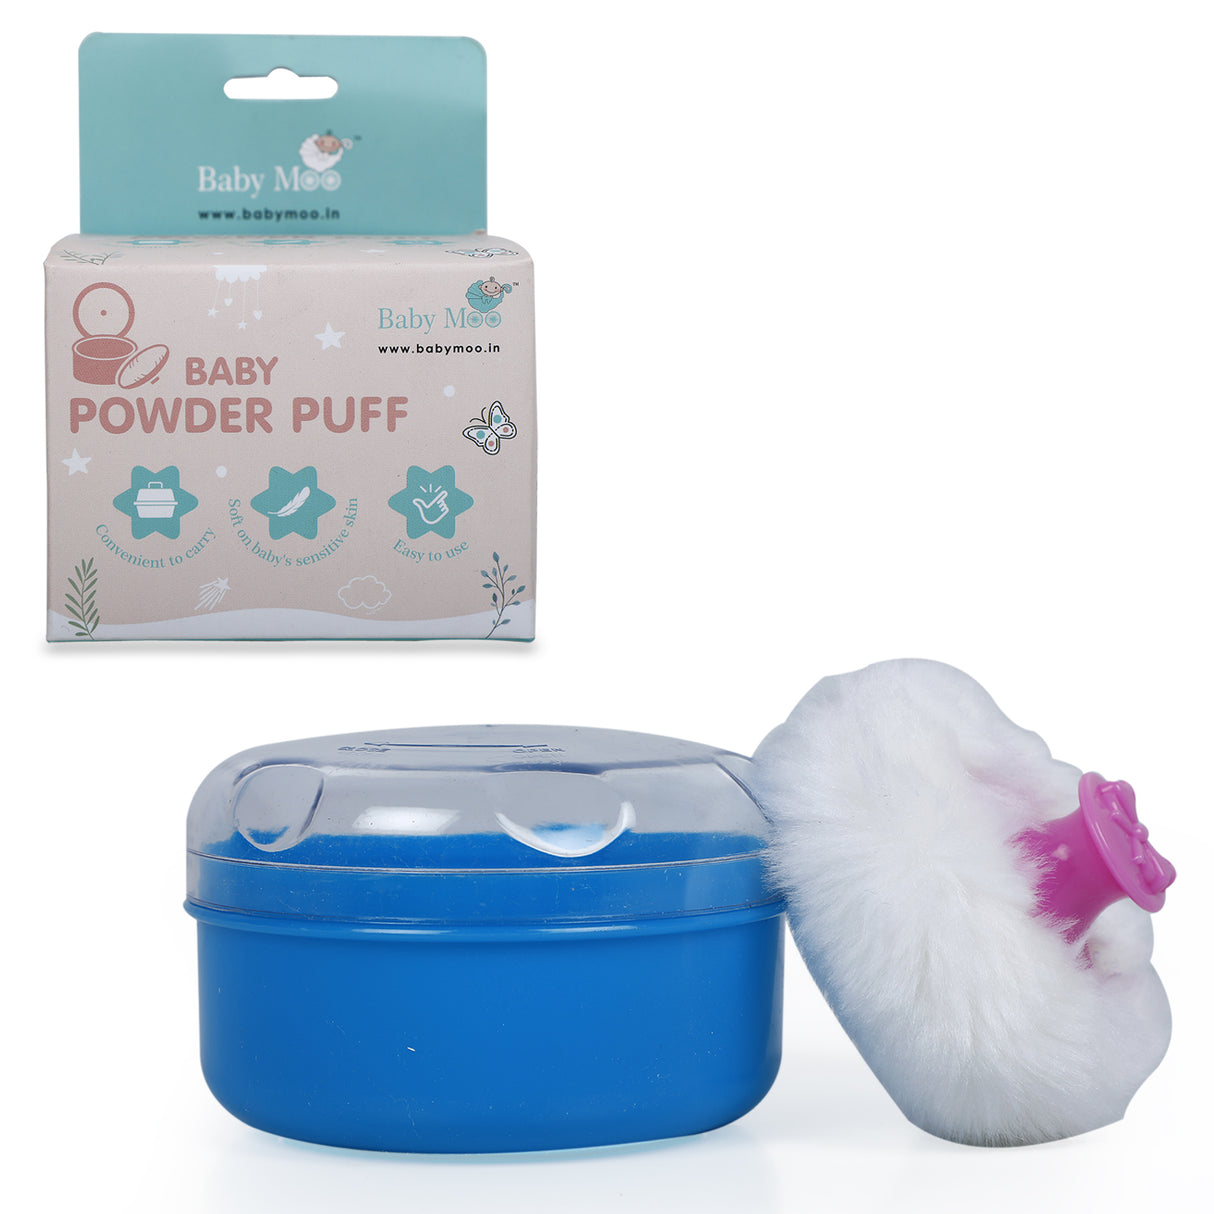 Soft Powder Puff With Container